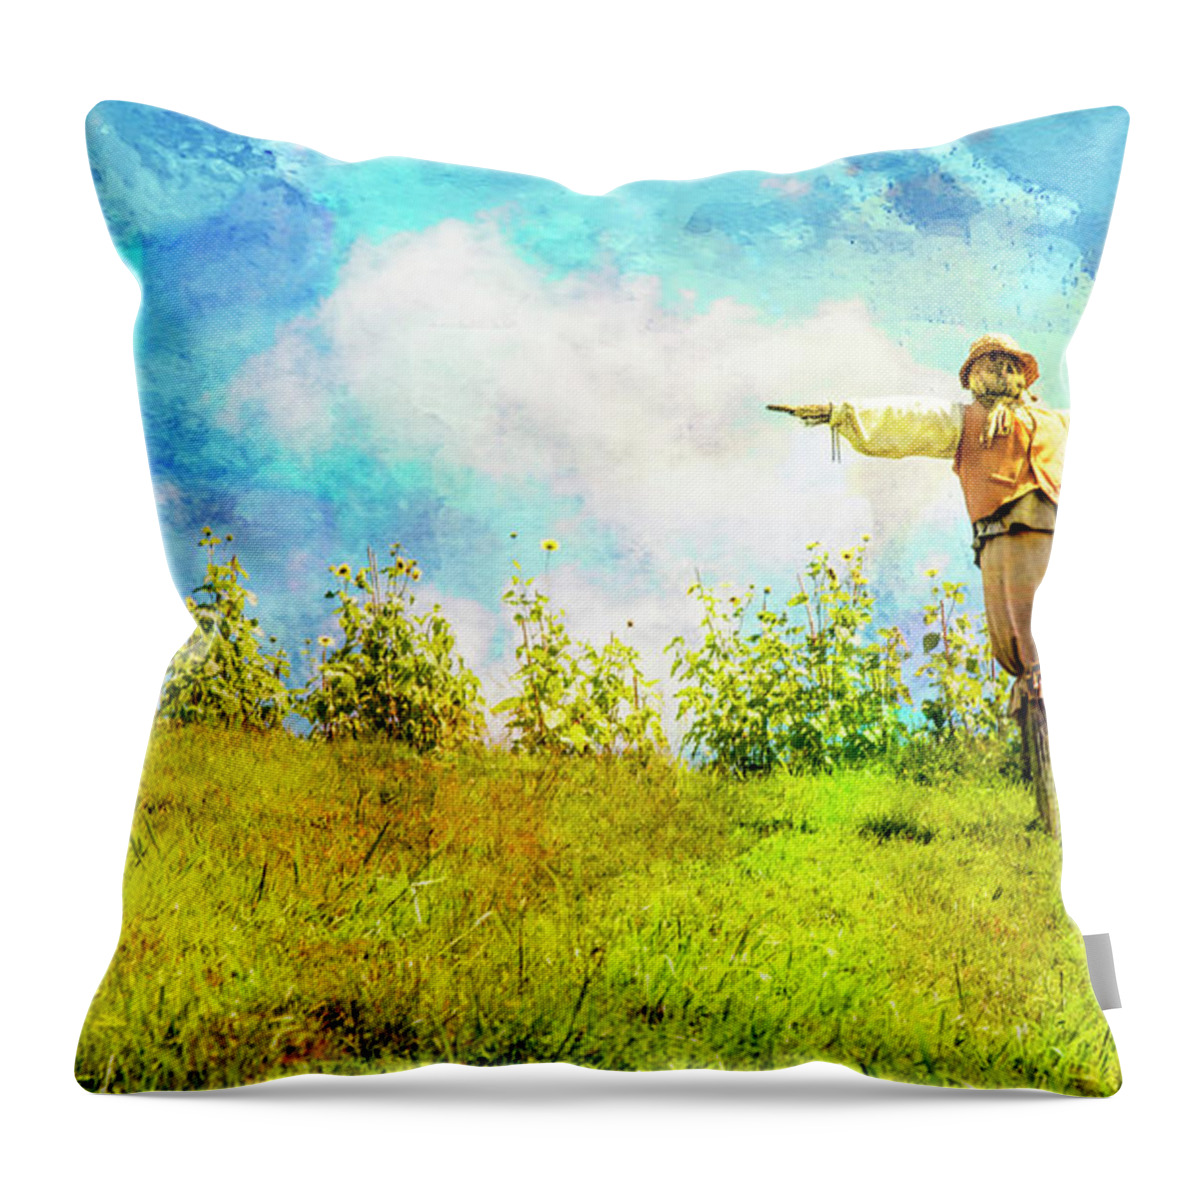 Hobbits Throw Pillow featuring the photograph Hobbit Scarecrow by Kathryn McBride